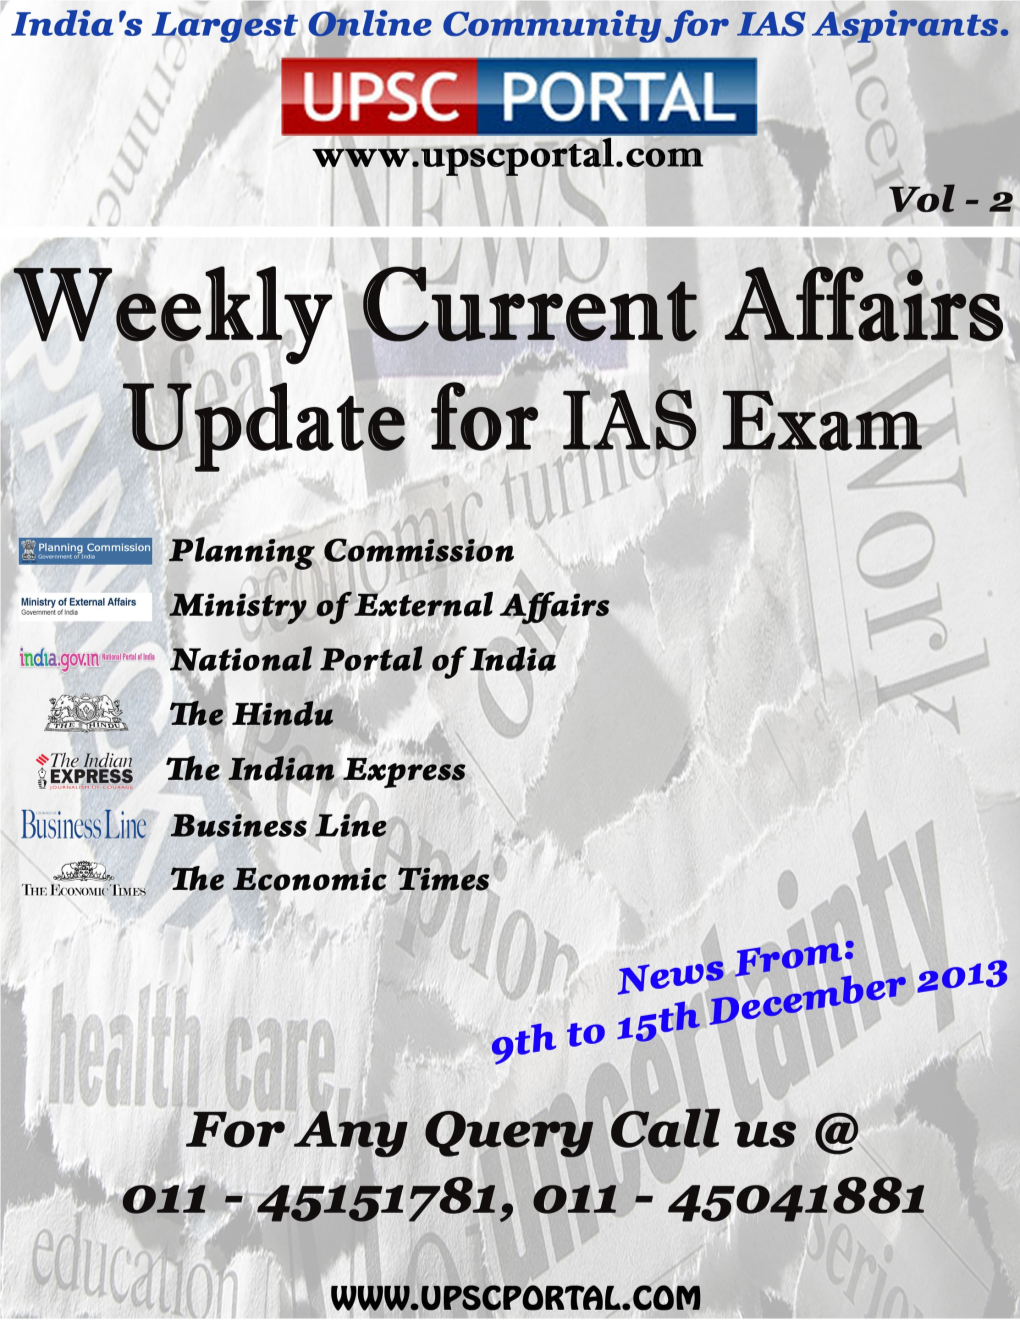 Weekly Current Affairs Update for IAS Exam 9